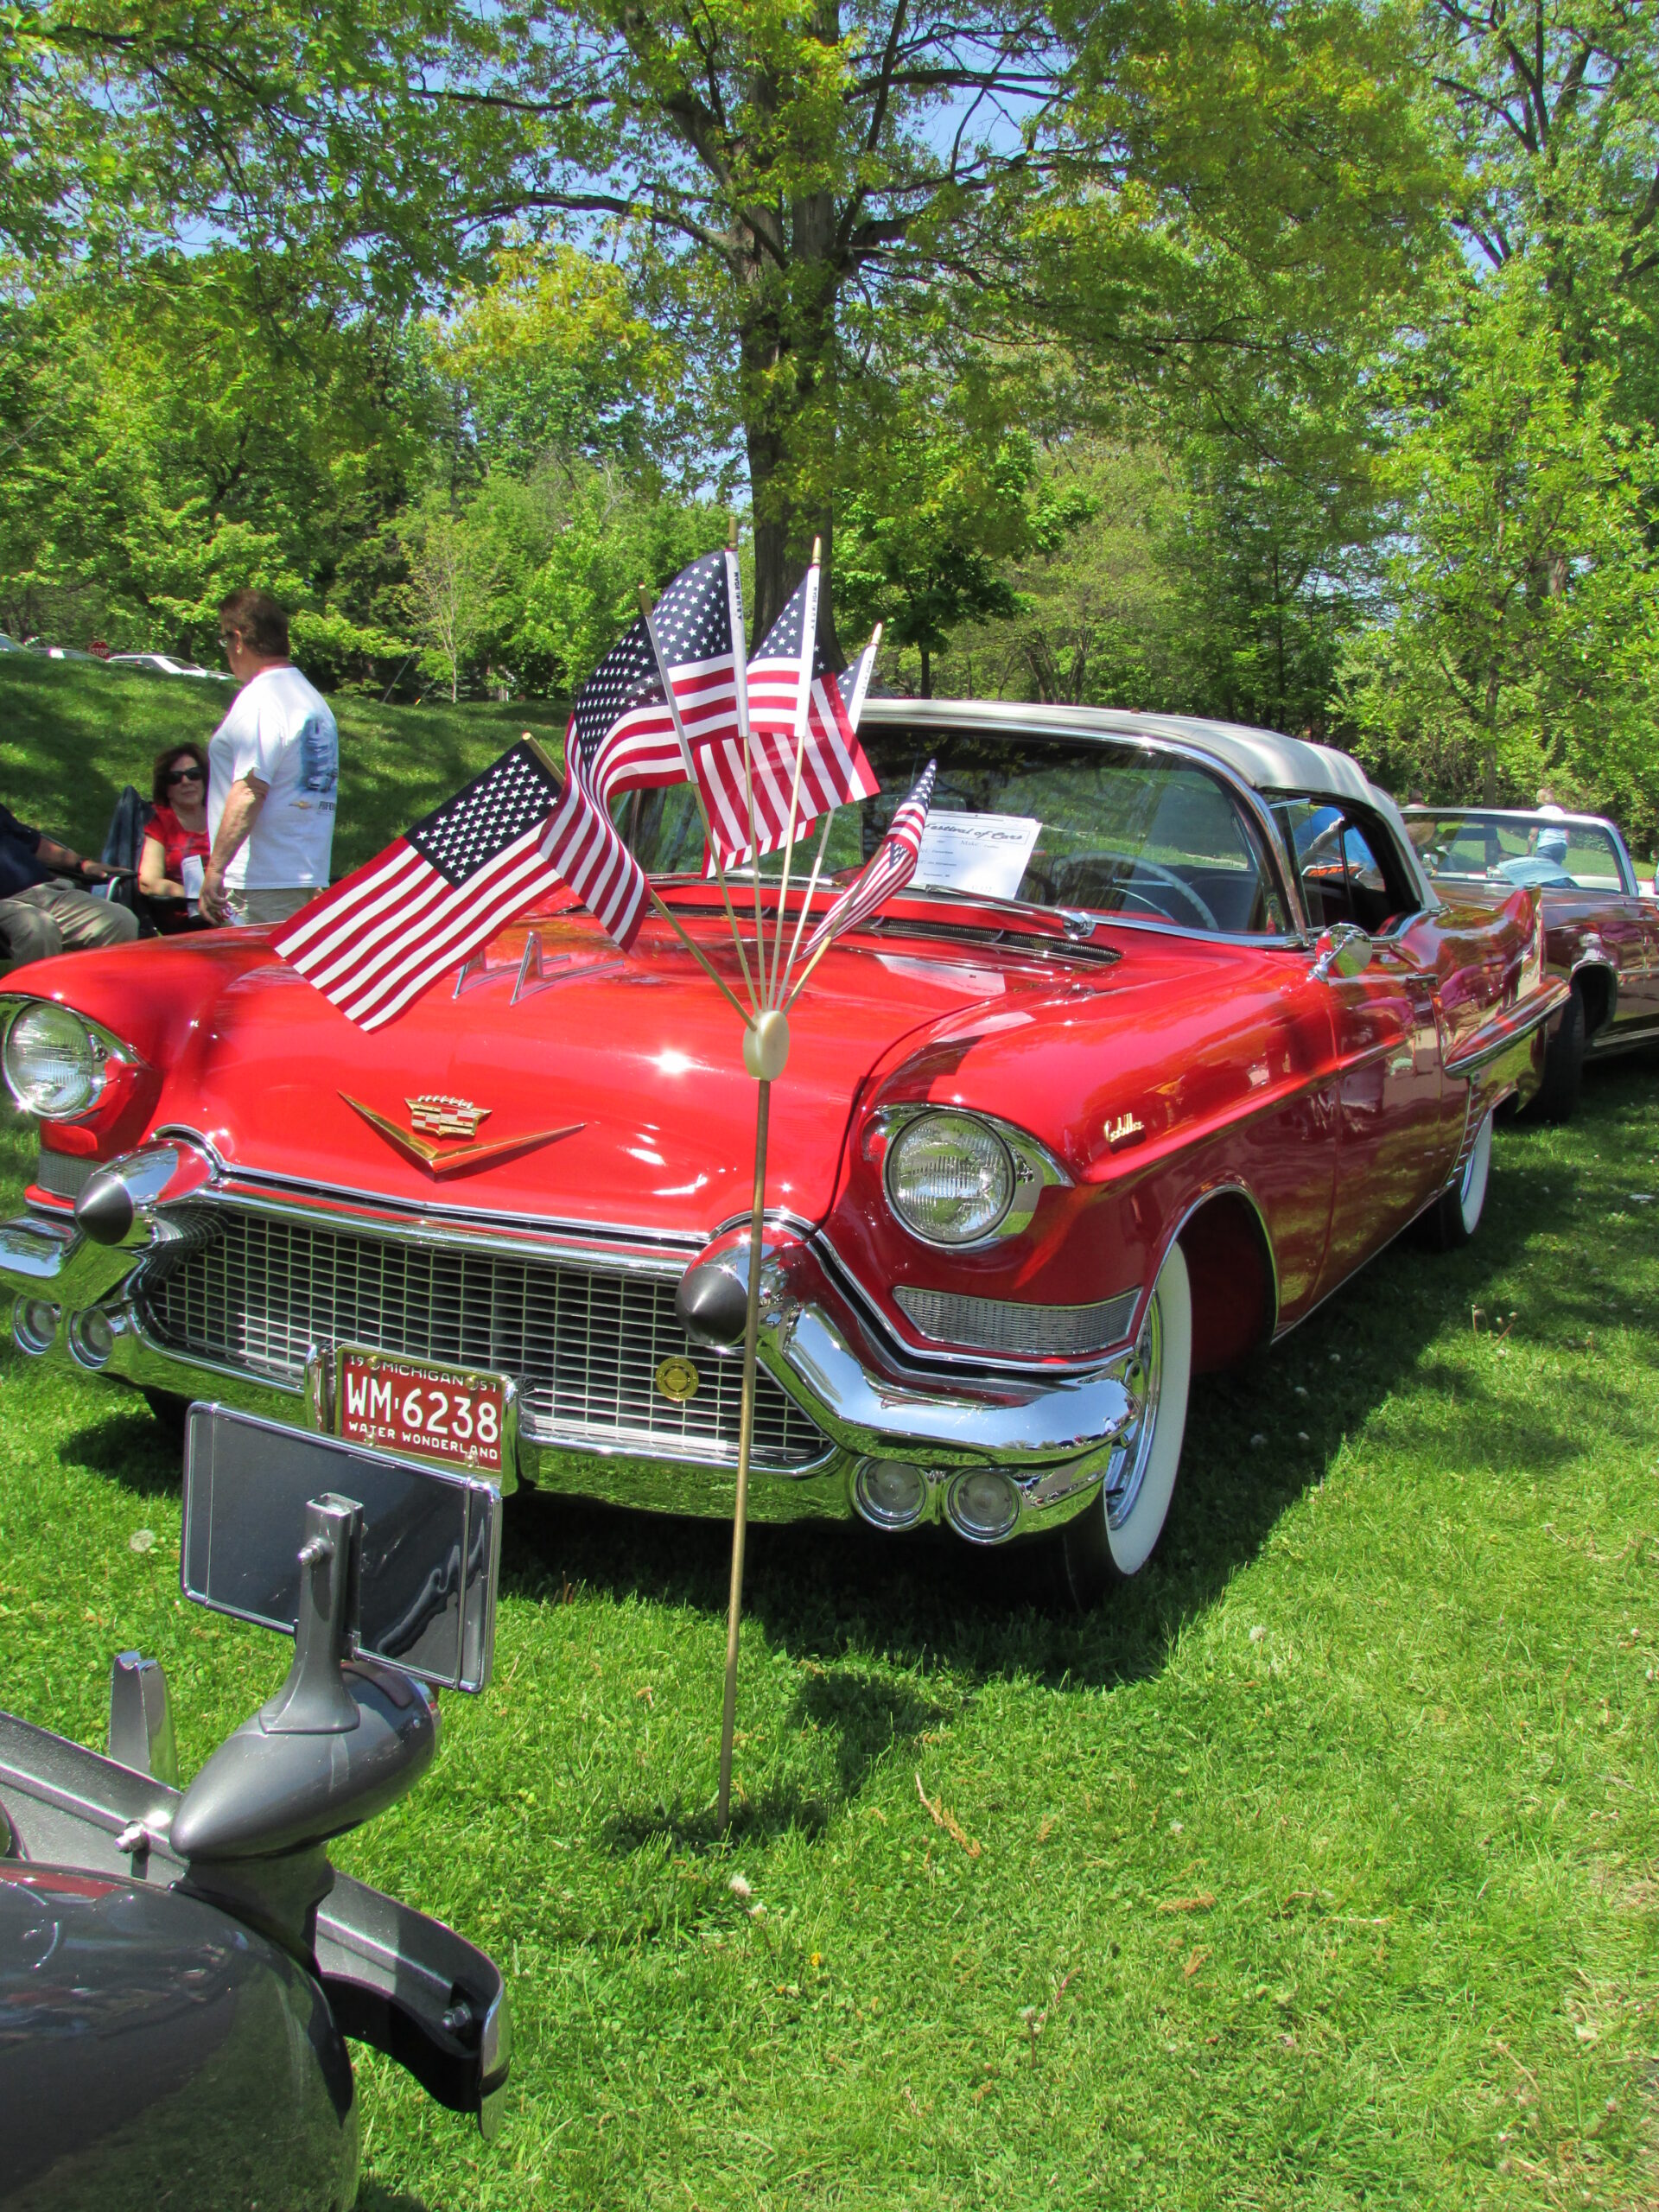 Old Red Car with American Flags